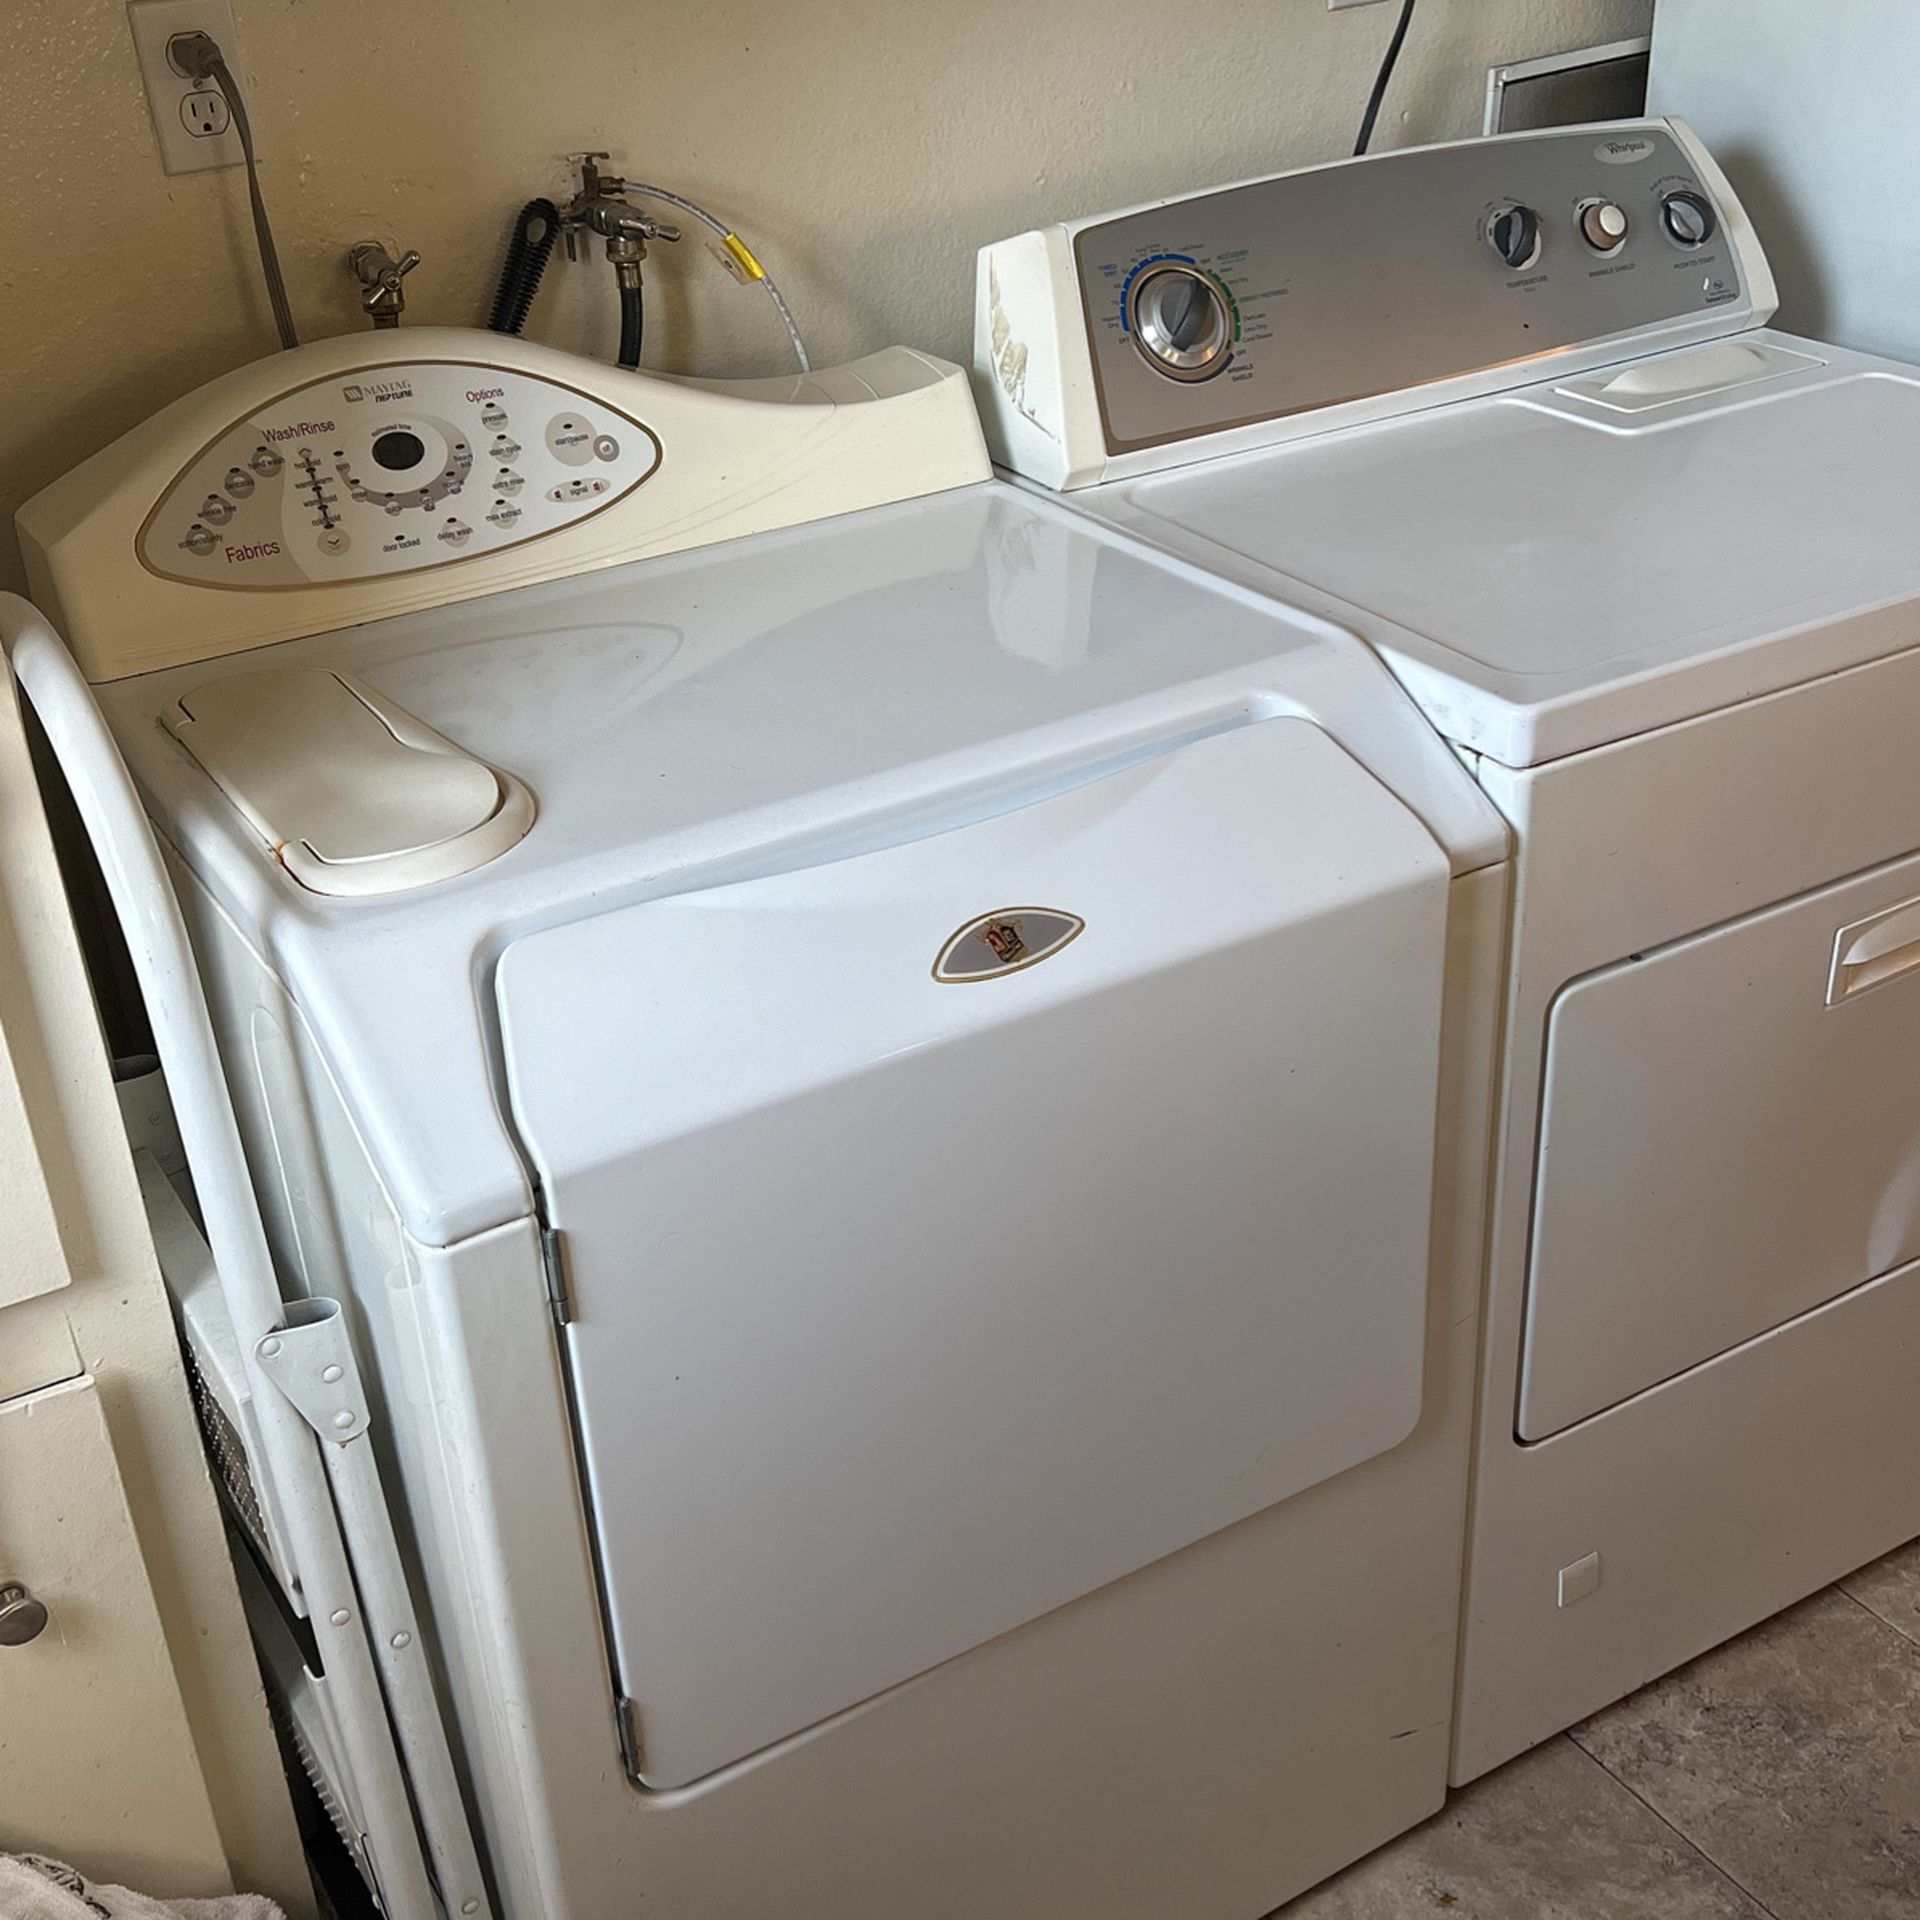 Maytag Neptune washer And Kenmore Dryer 150 Takes both!